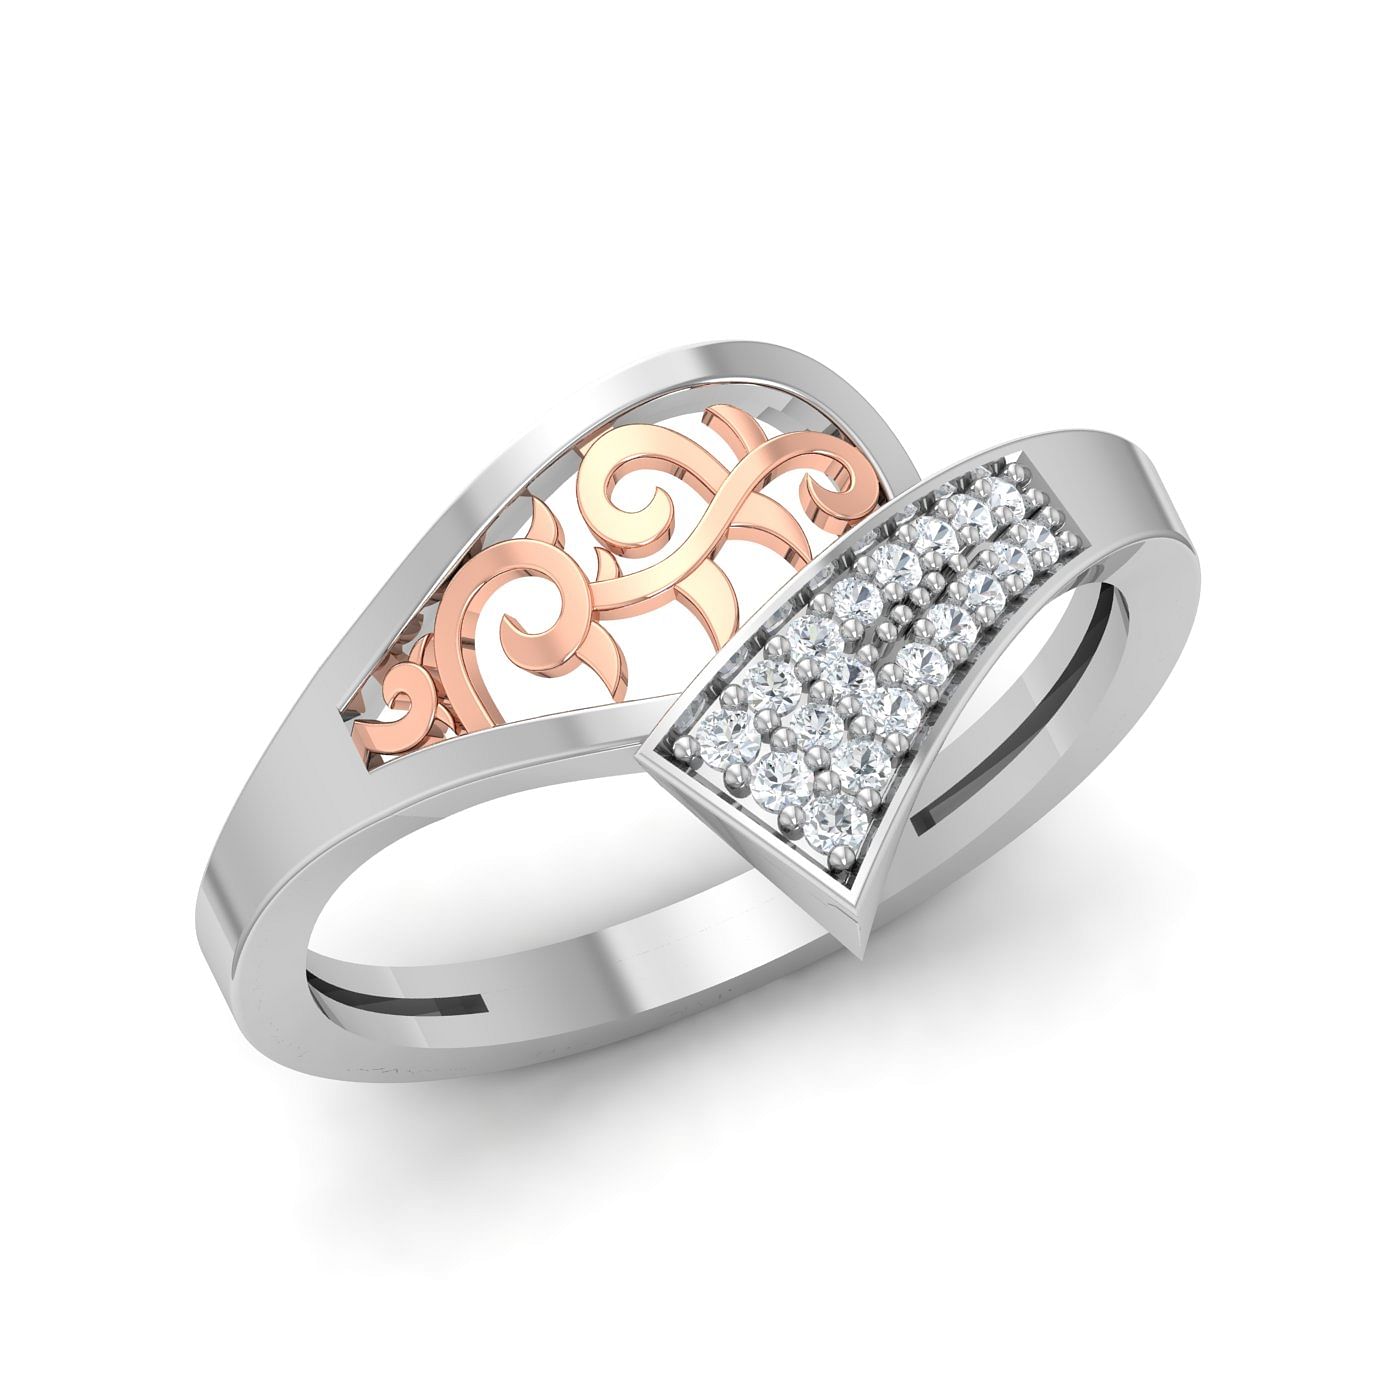 Carving Style White Gold Diamond Ring For Women